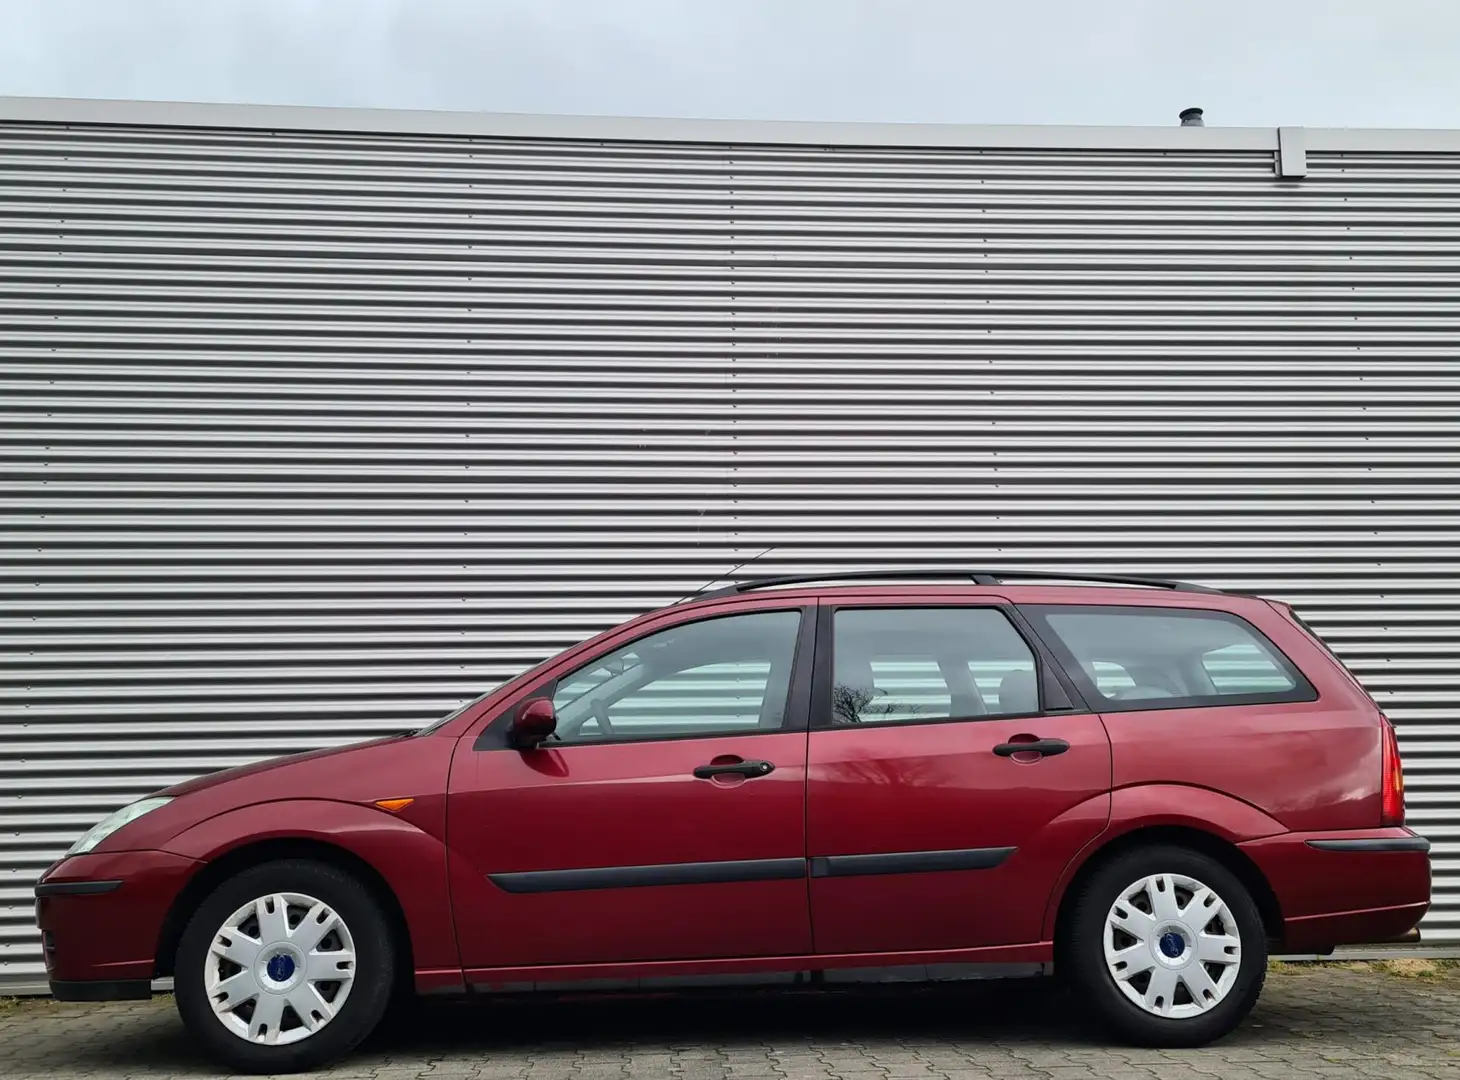 Ford Focus Wagon 1.6-16V Cool Edition 10-2002 Bordeaux Rood M Red - 2